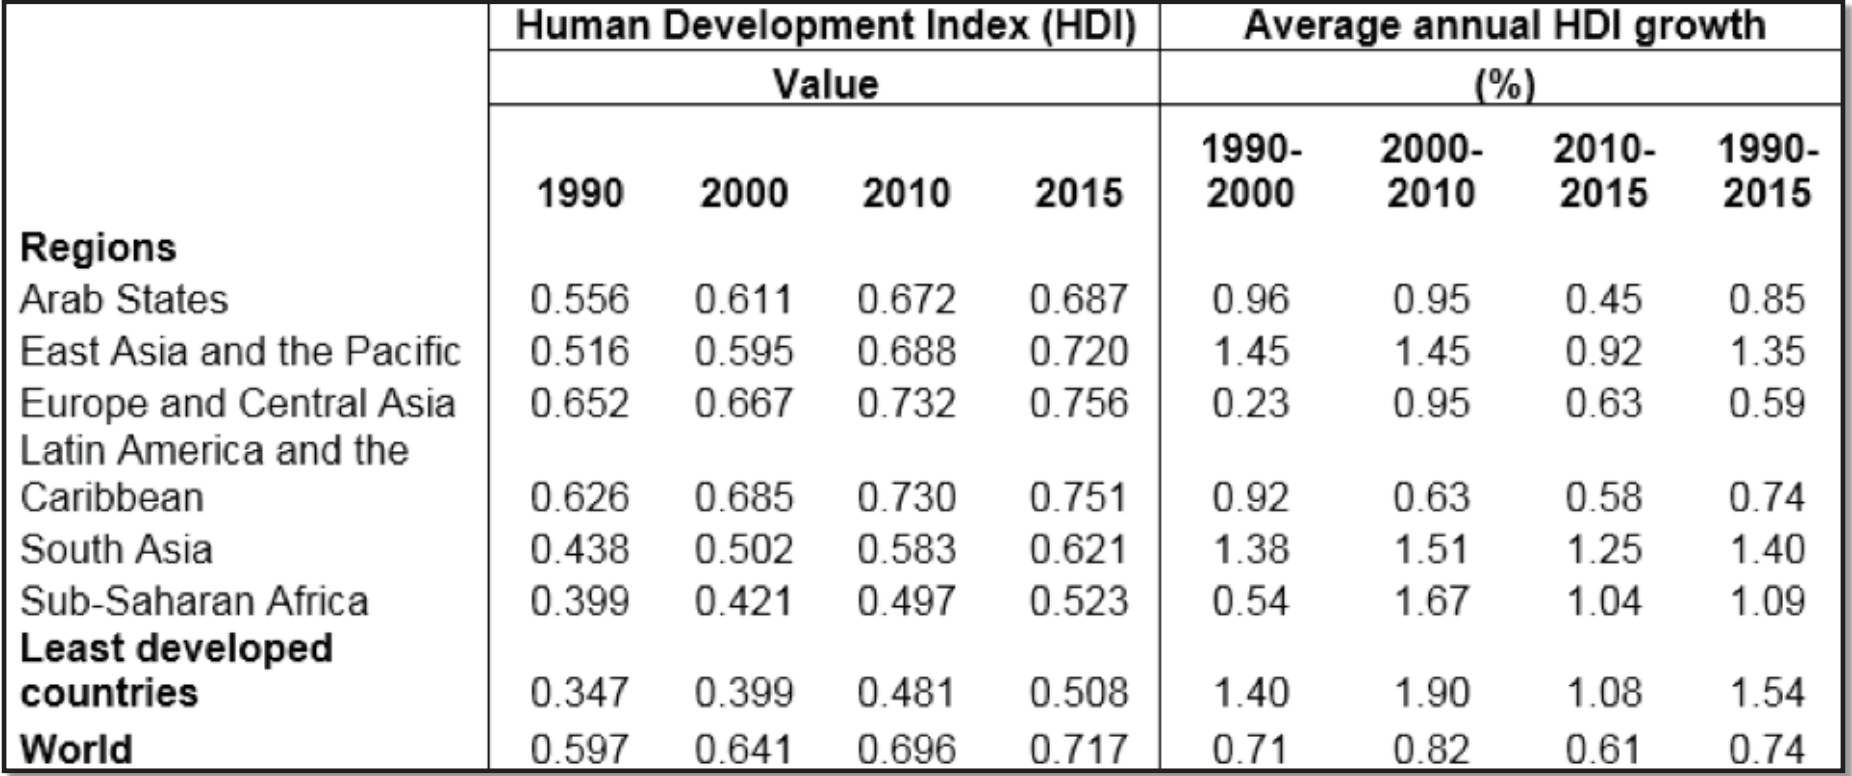 Human Development Index by Region and Time Period